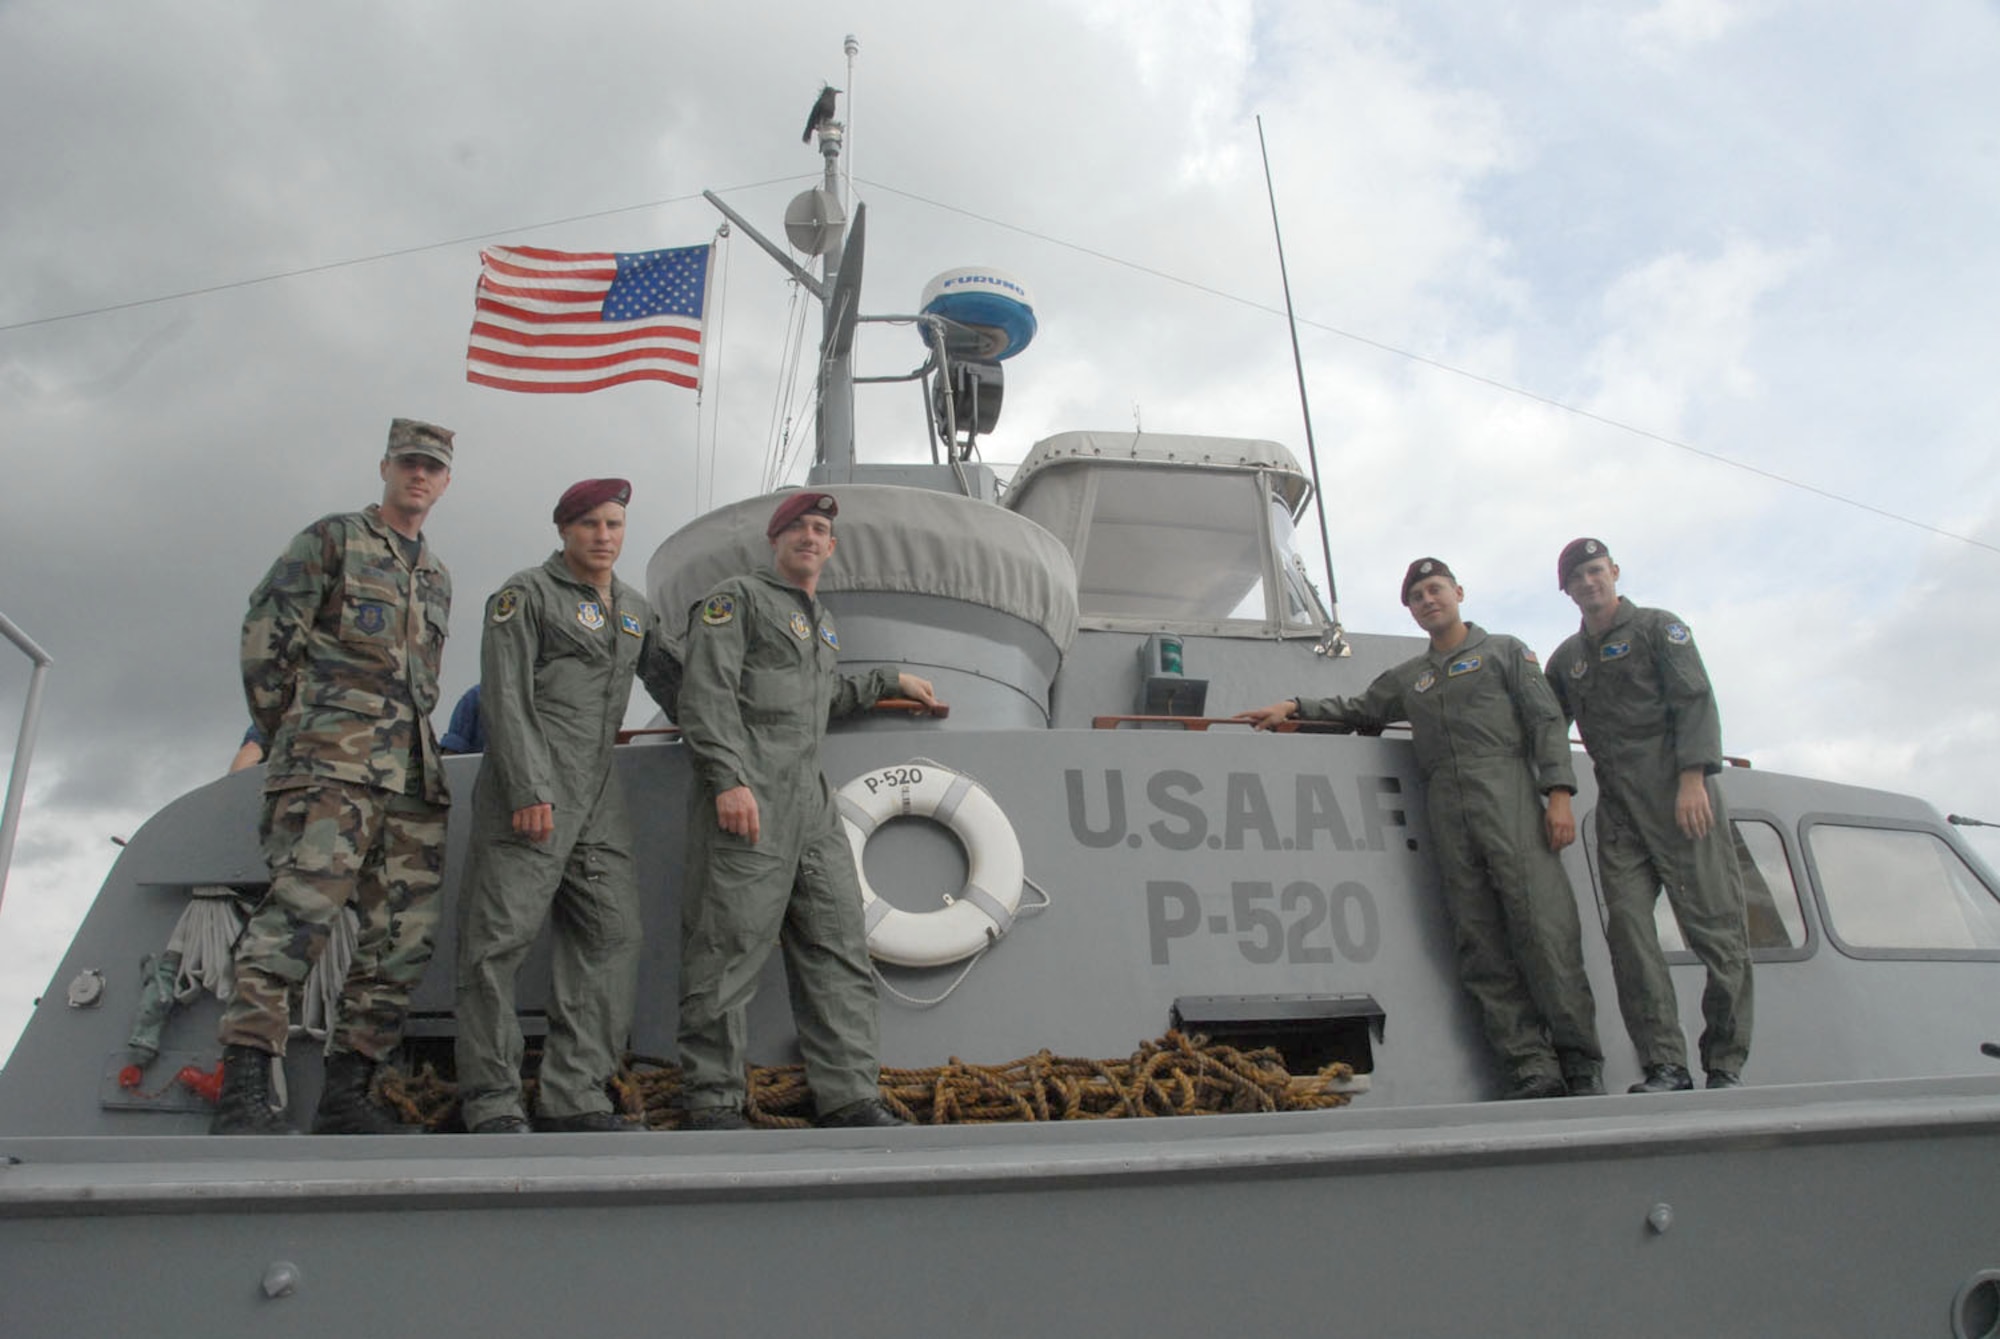 Air Force Reserve Airmen from the 304th Rescue Squadron, pose for a shot on top of a rescue relic, a P-520 Crash Boat. (Air Force photo/Master Sgt. Chance C. Babin)